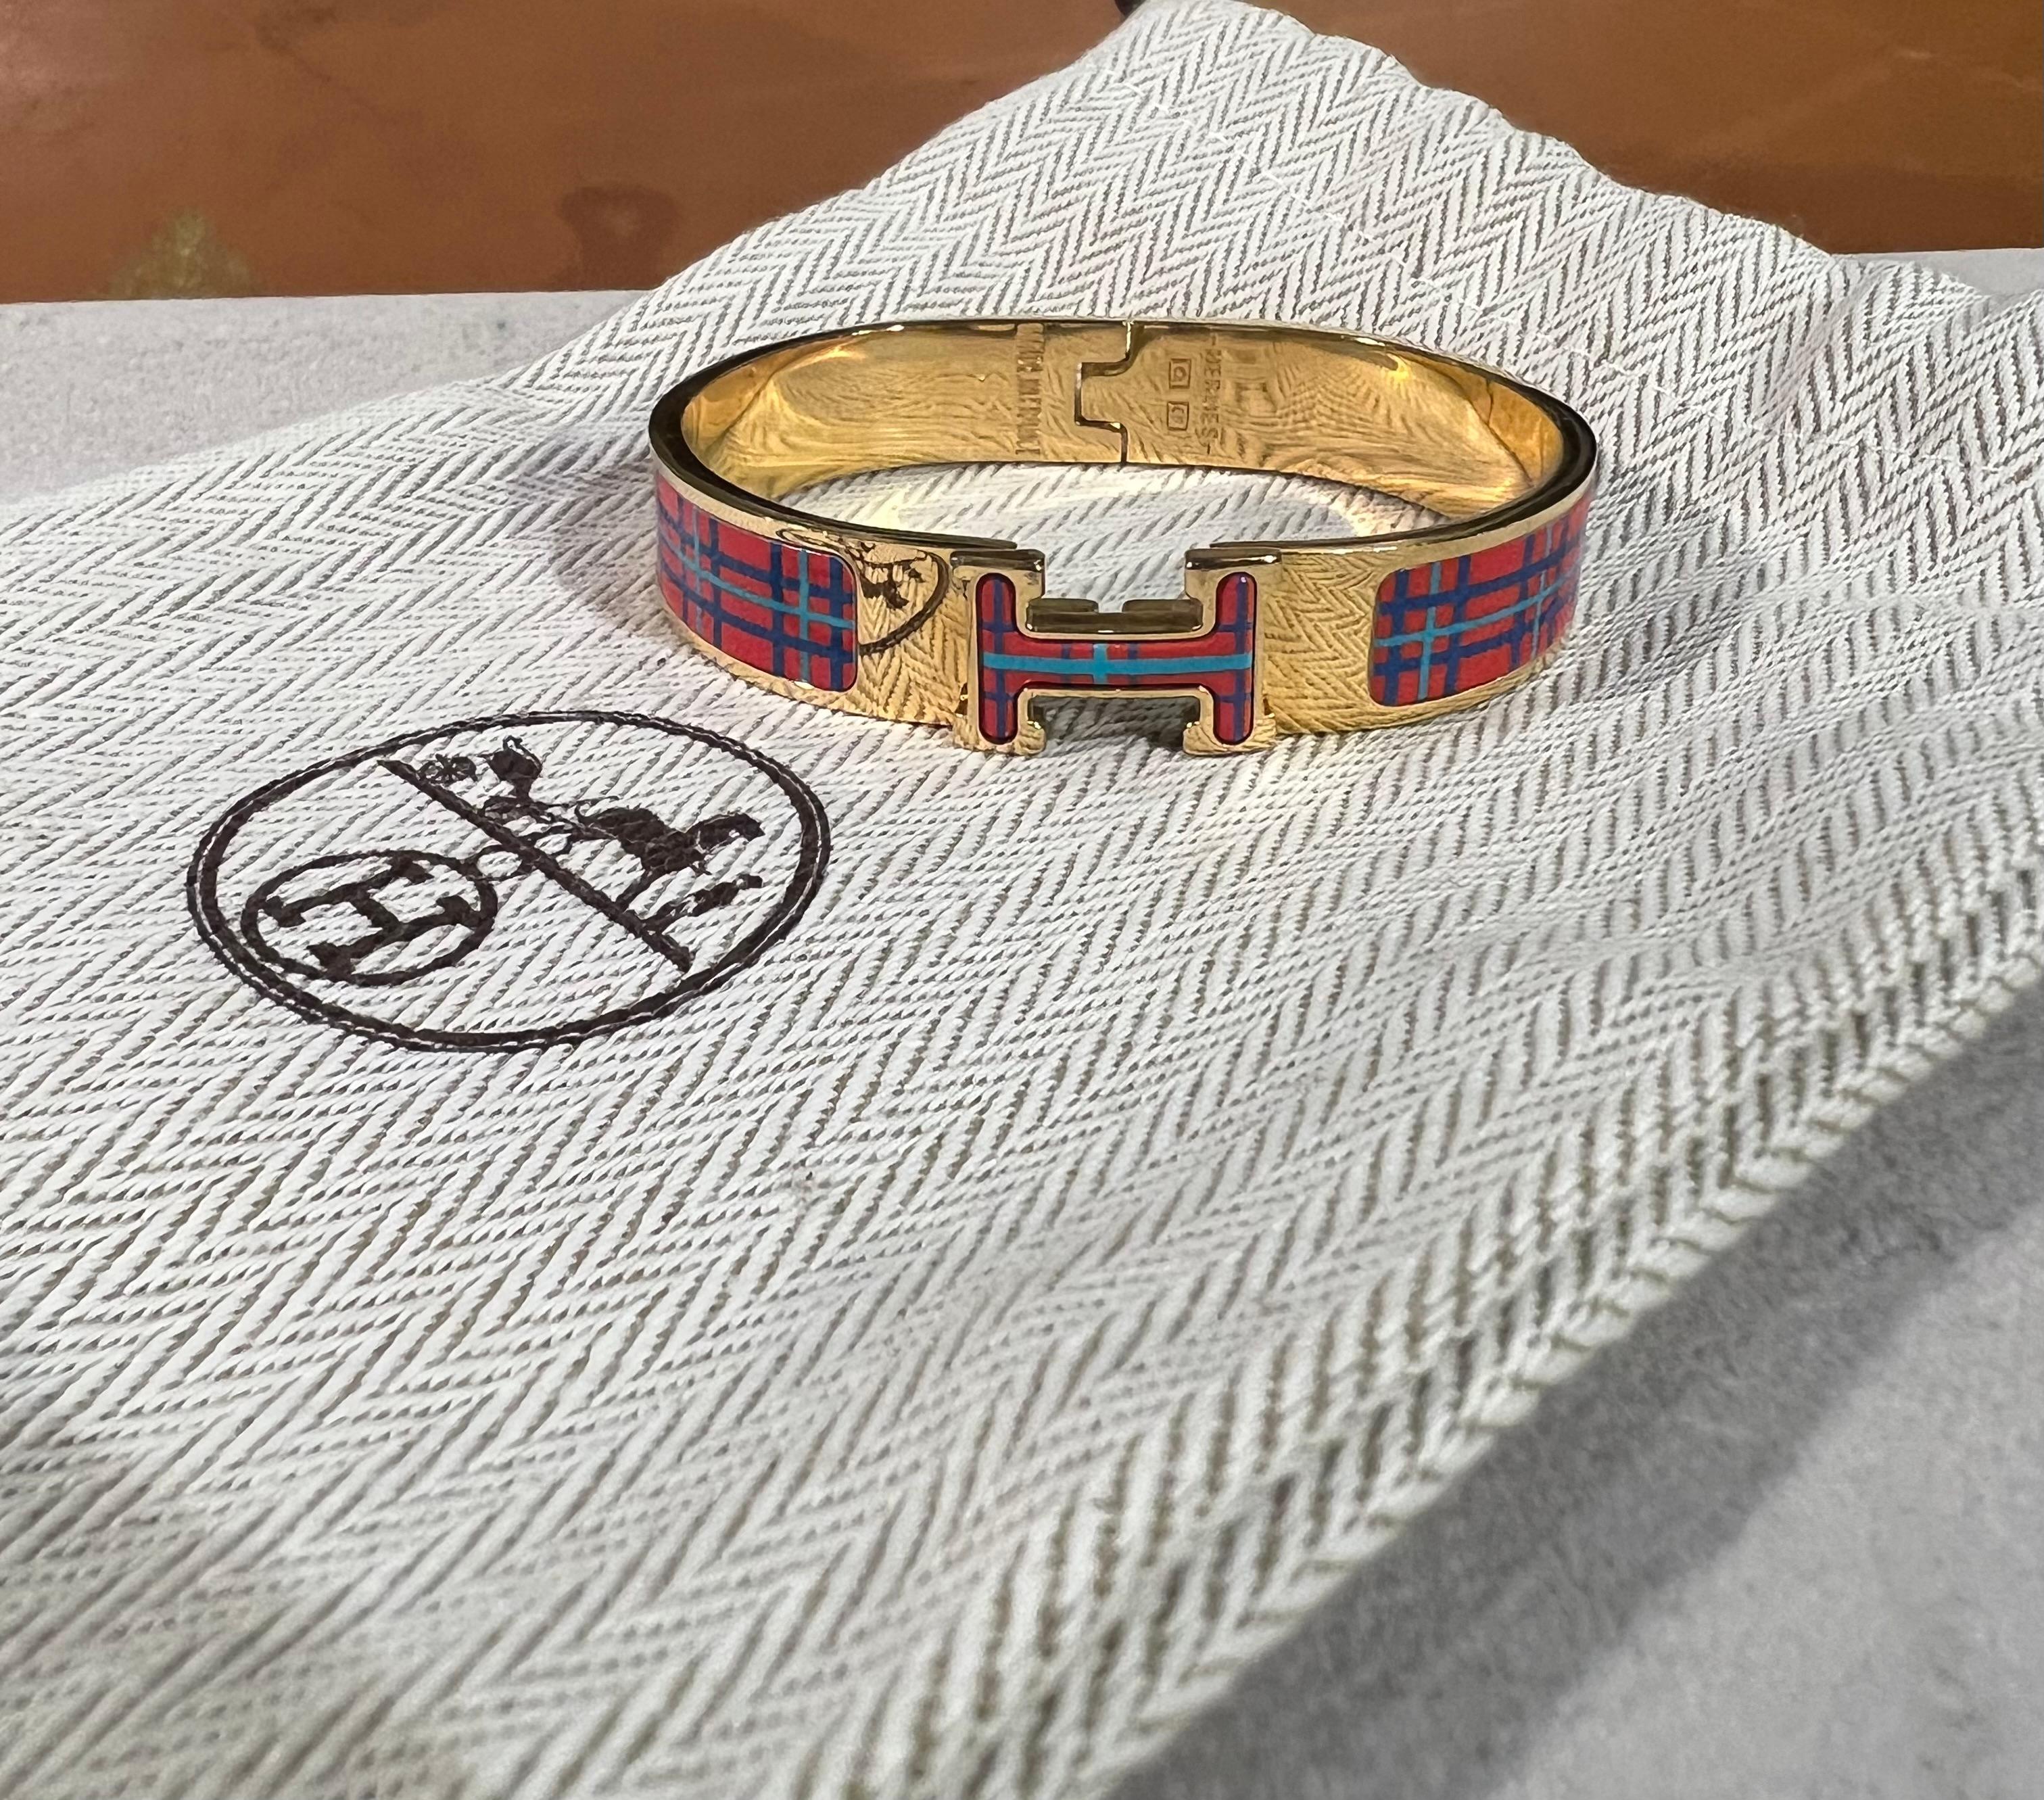 Hermes Clic-H bracelet in gold-plated metal and enamel with orange and blue tartan pattern.

Length: 18 cm (7.08 inch)

Width: 12 mm (0.47 inch)

Weight of the bracelet: 35 g

Retail price : 670 euros

Sold with its original travel pouch.

Although